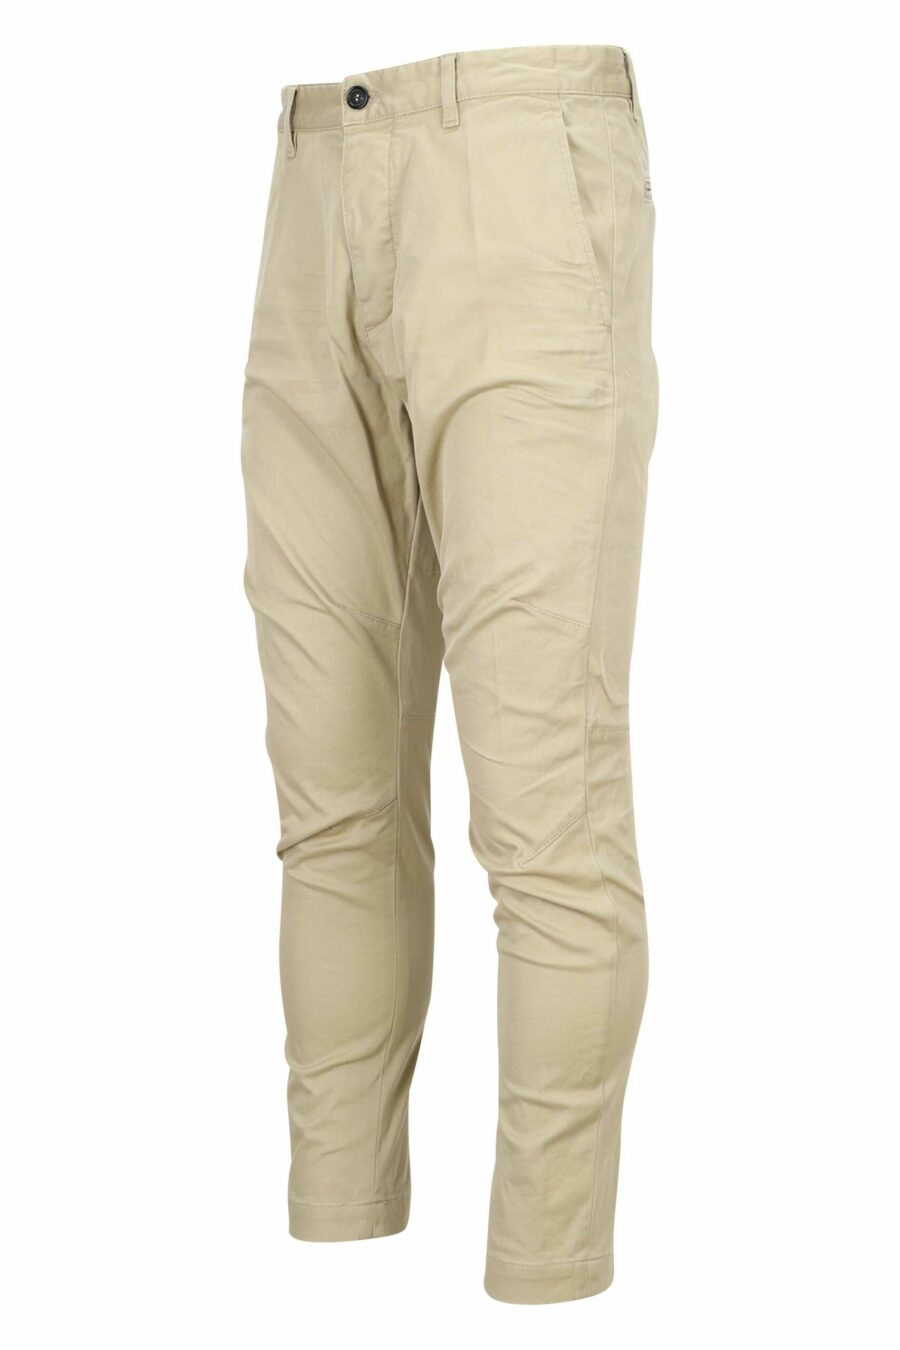 Beige "sexy chino pant" with mini-logo - 8052134973257 1 scaled